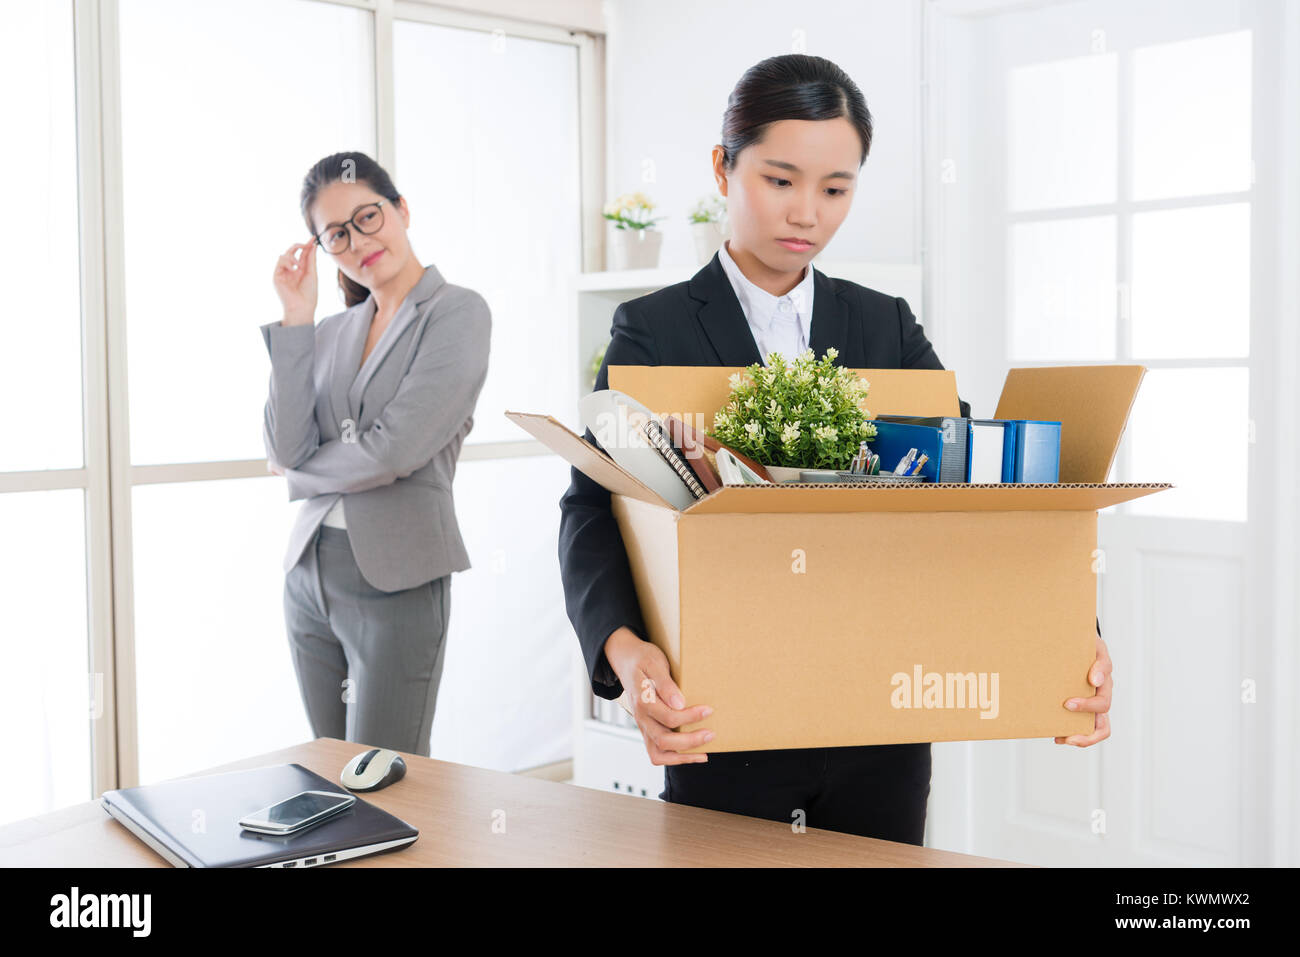 happy elegant company manager woman feeling cheerful when her colleague girl receives layoff message and ready leaving company. Stock Photo